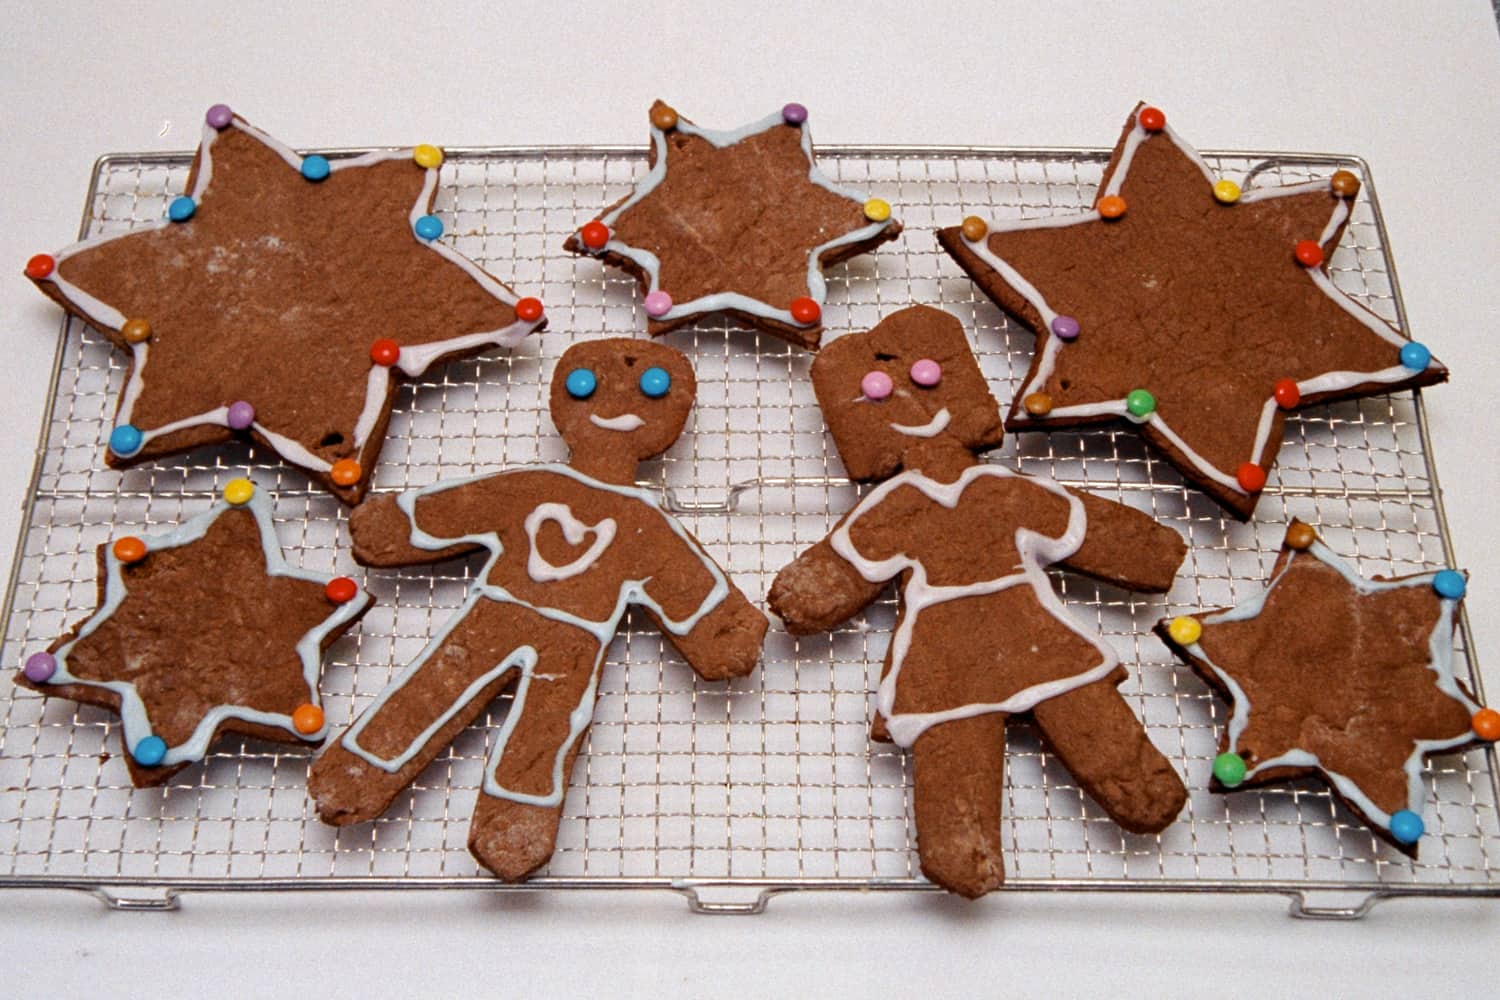 The Gingerbread People and Stars.